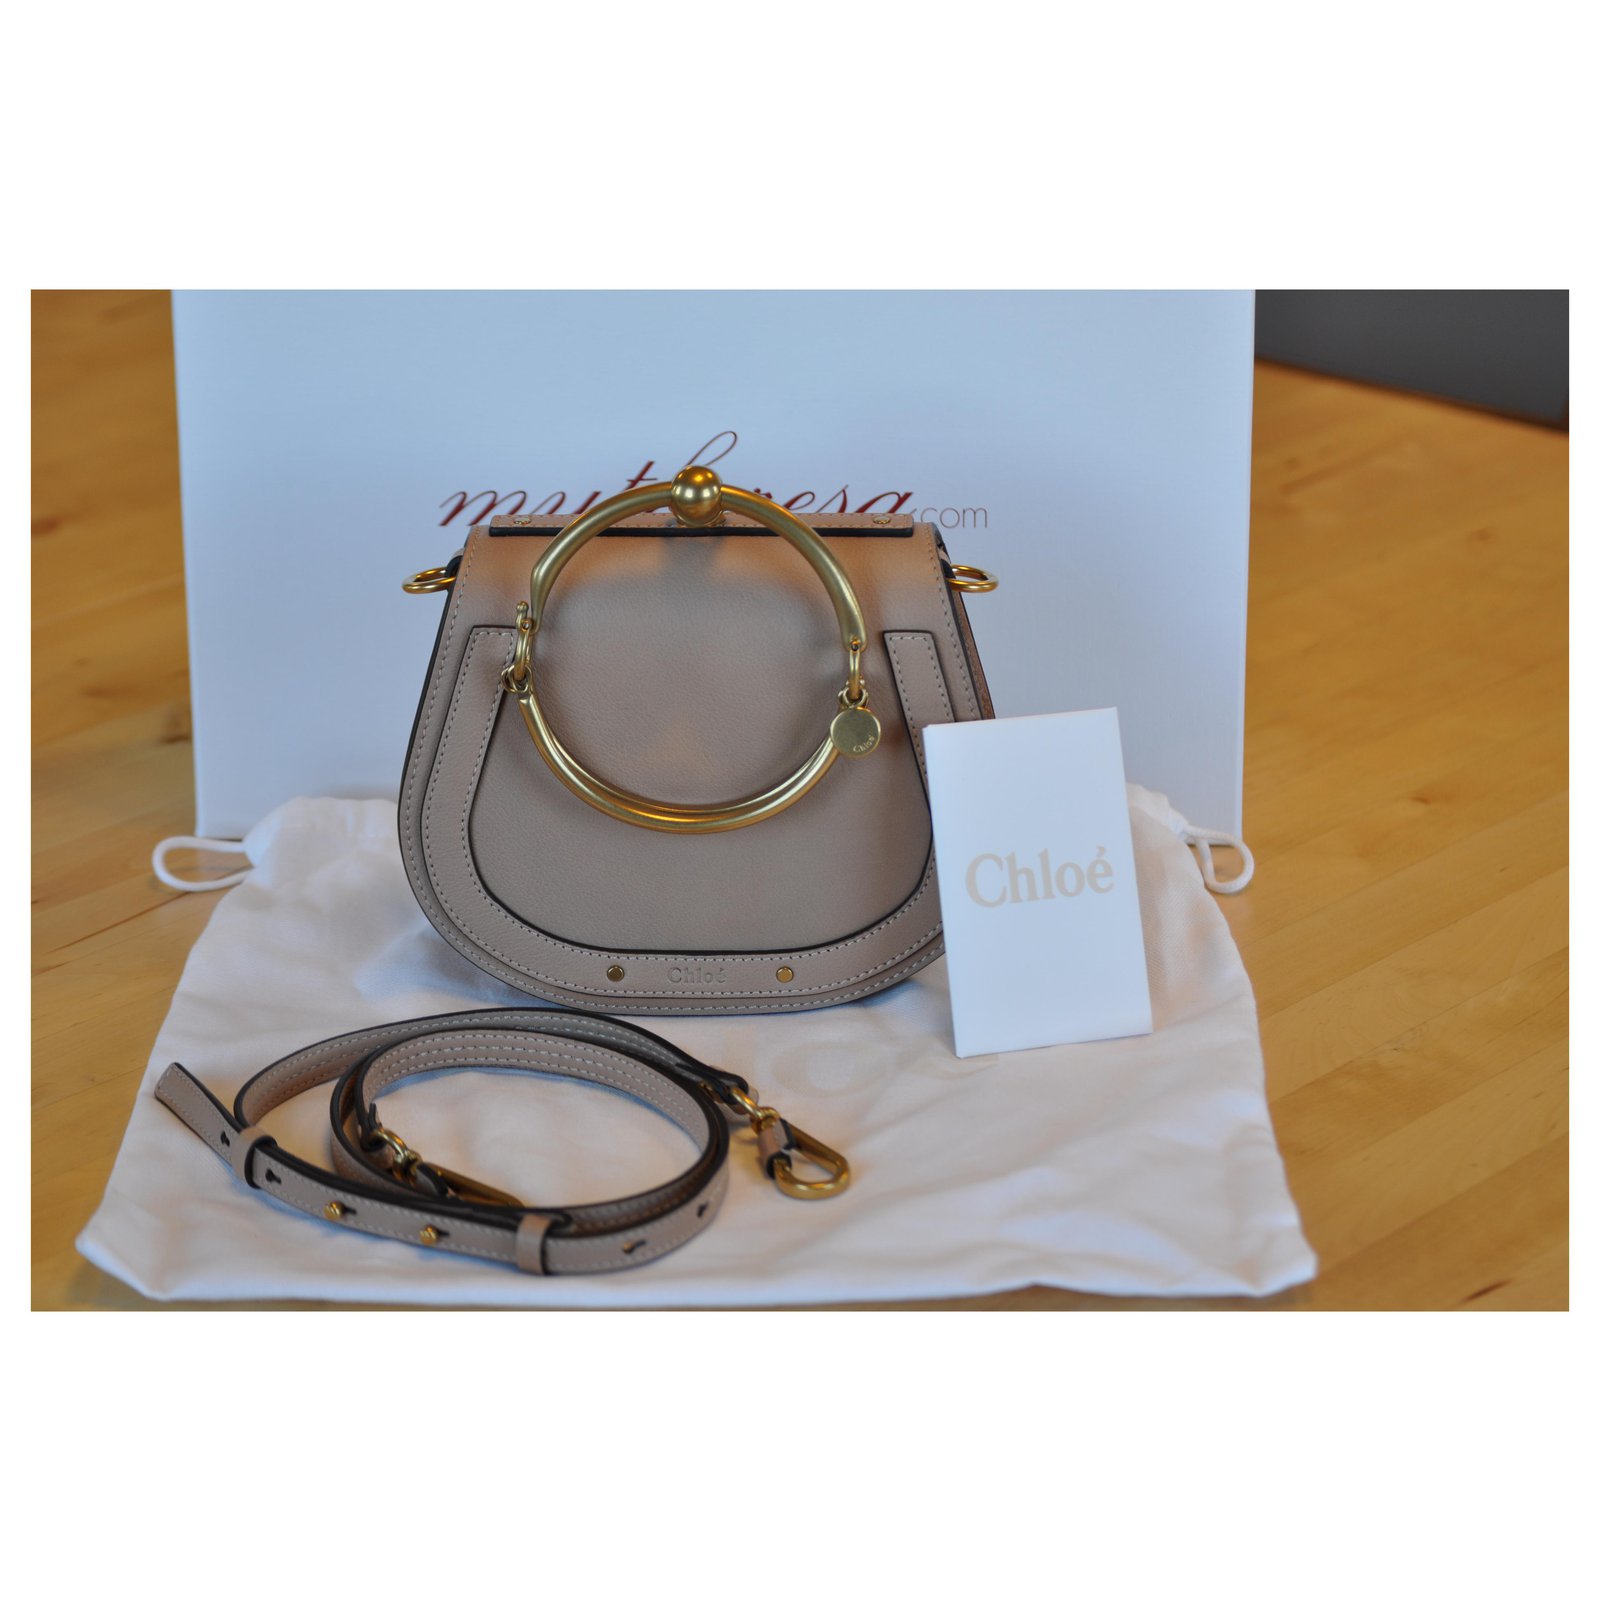 BRAND NEW with Tags Chloe Nile Small Bracelet Bag - Pink/Beige - NWT